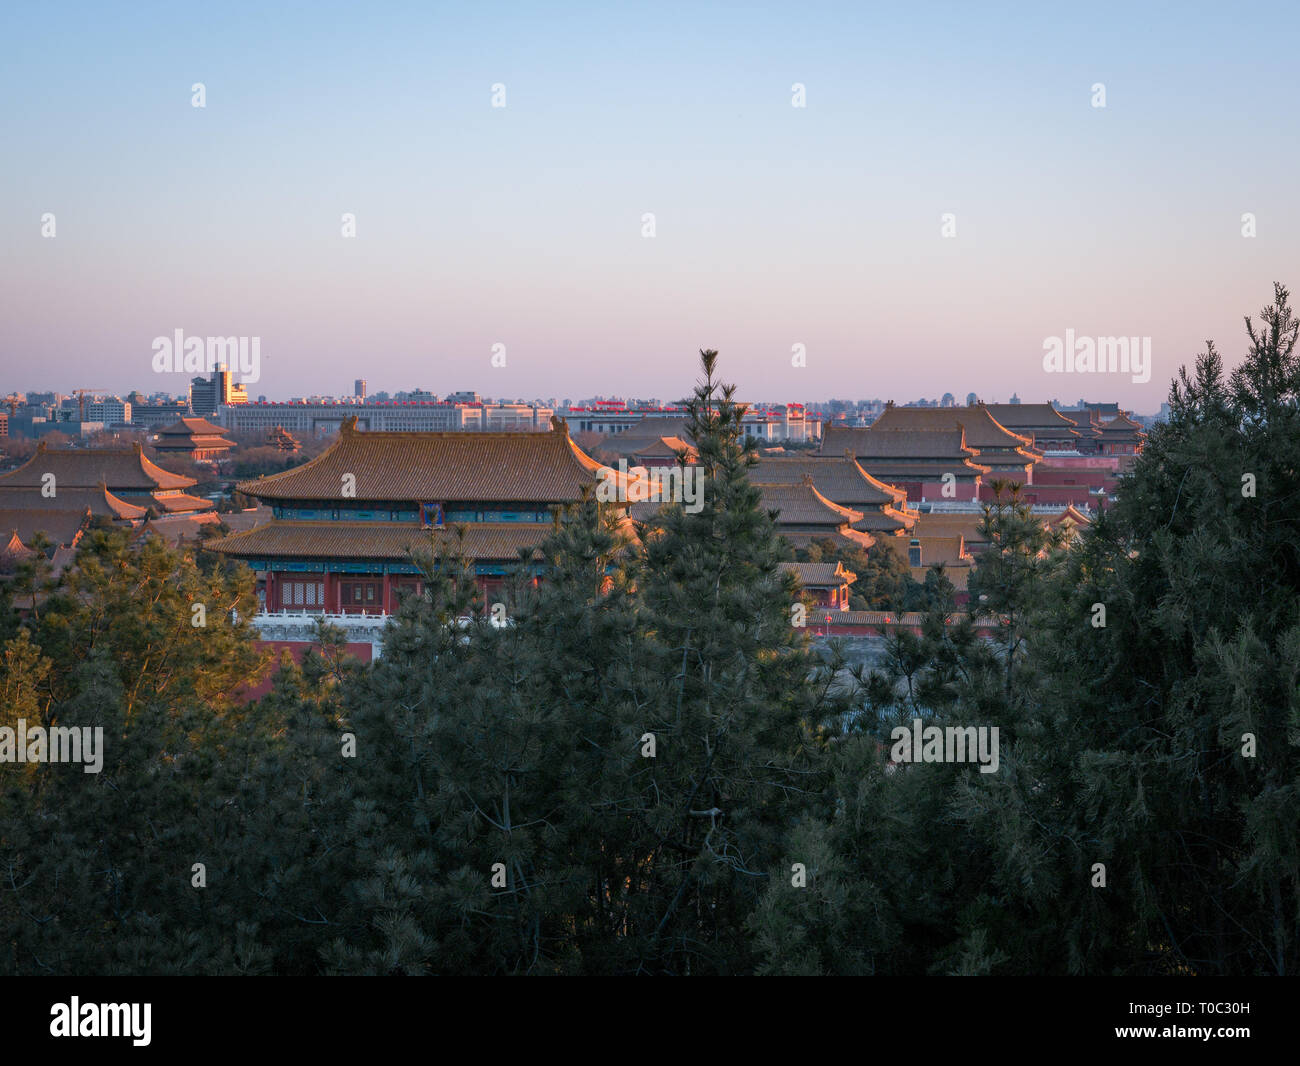 Beijing ancient Forbidden City from above in sunset light in diagonal perspective with trees in the foreground, China Stock Photo